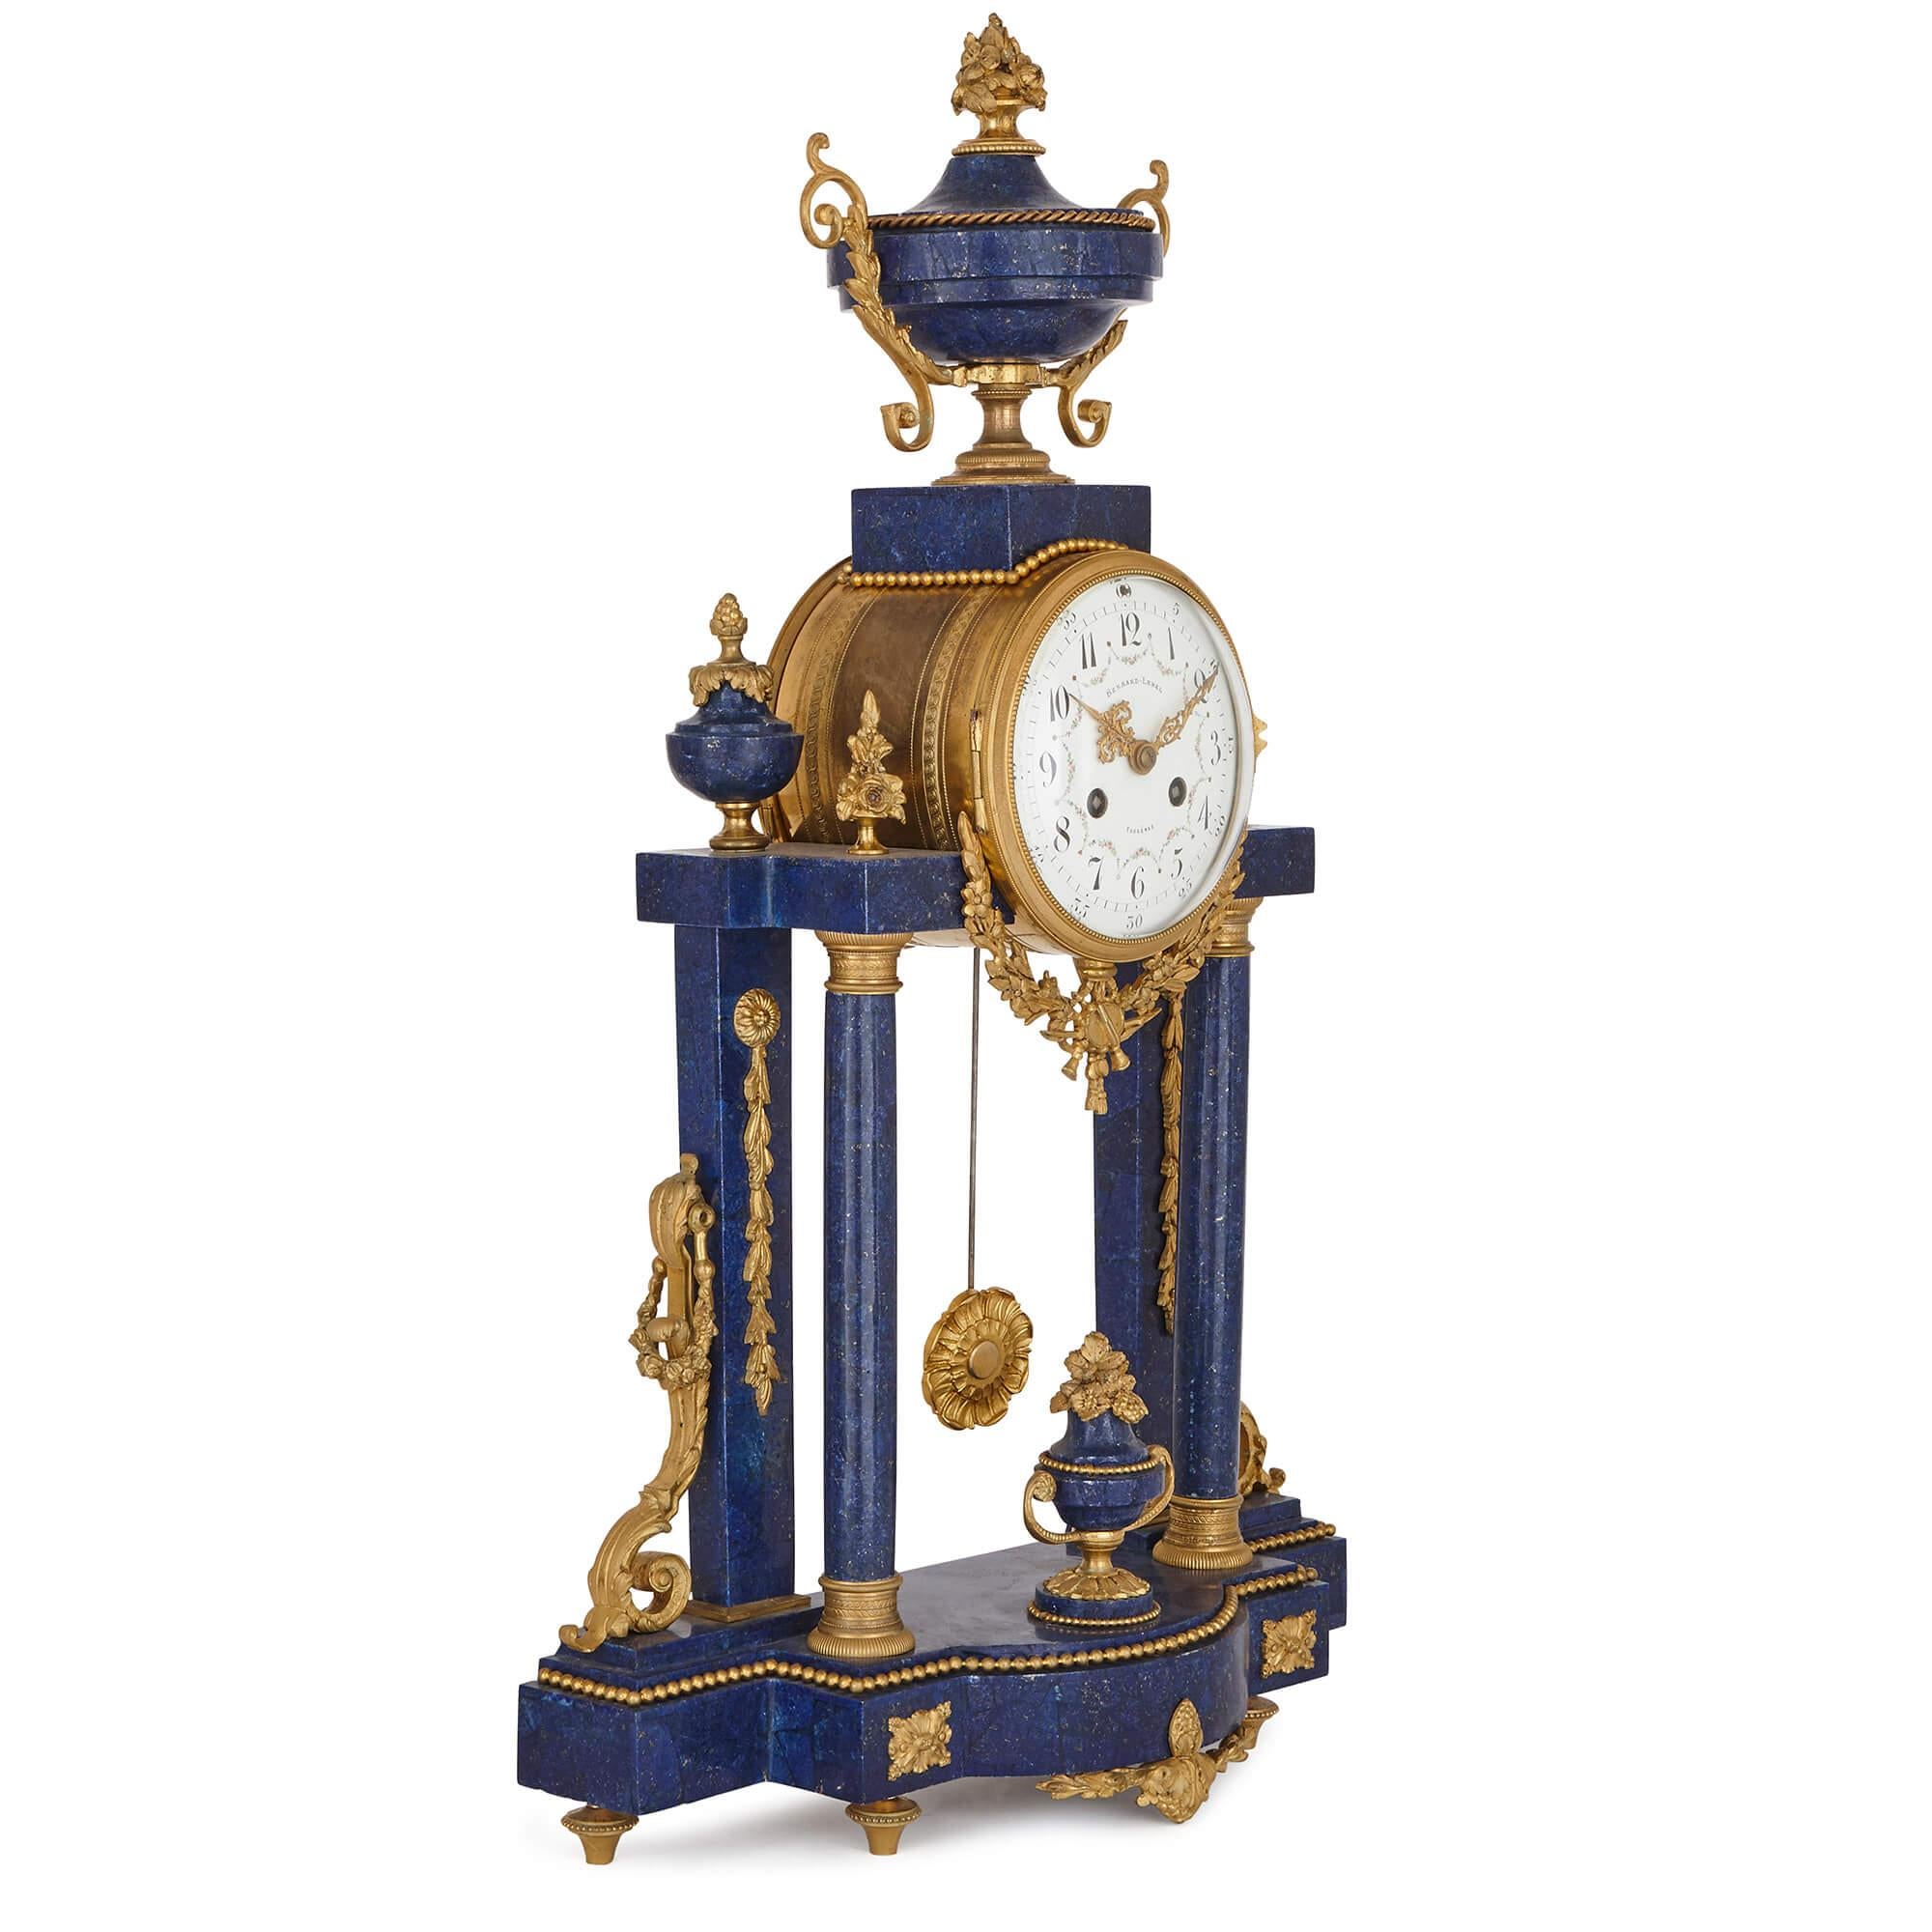 This fine three piece clock set was made in the late 19th century, and enhanced more recently with a rich lapis lazuli veneer. Designed in the timeless neoclassical style, the set is a splendid example of an antique piece which can be placed in